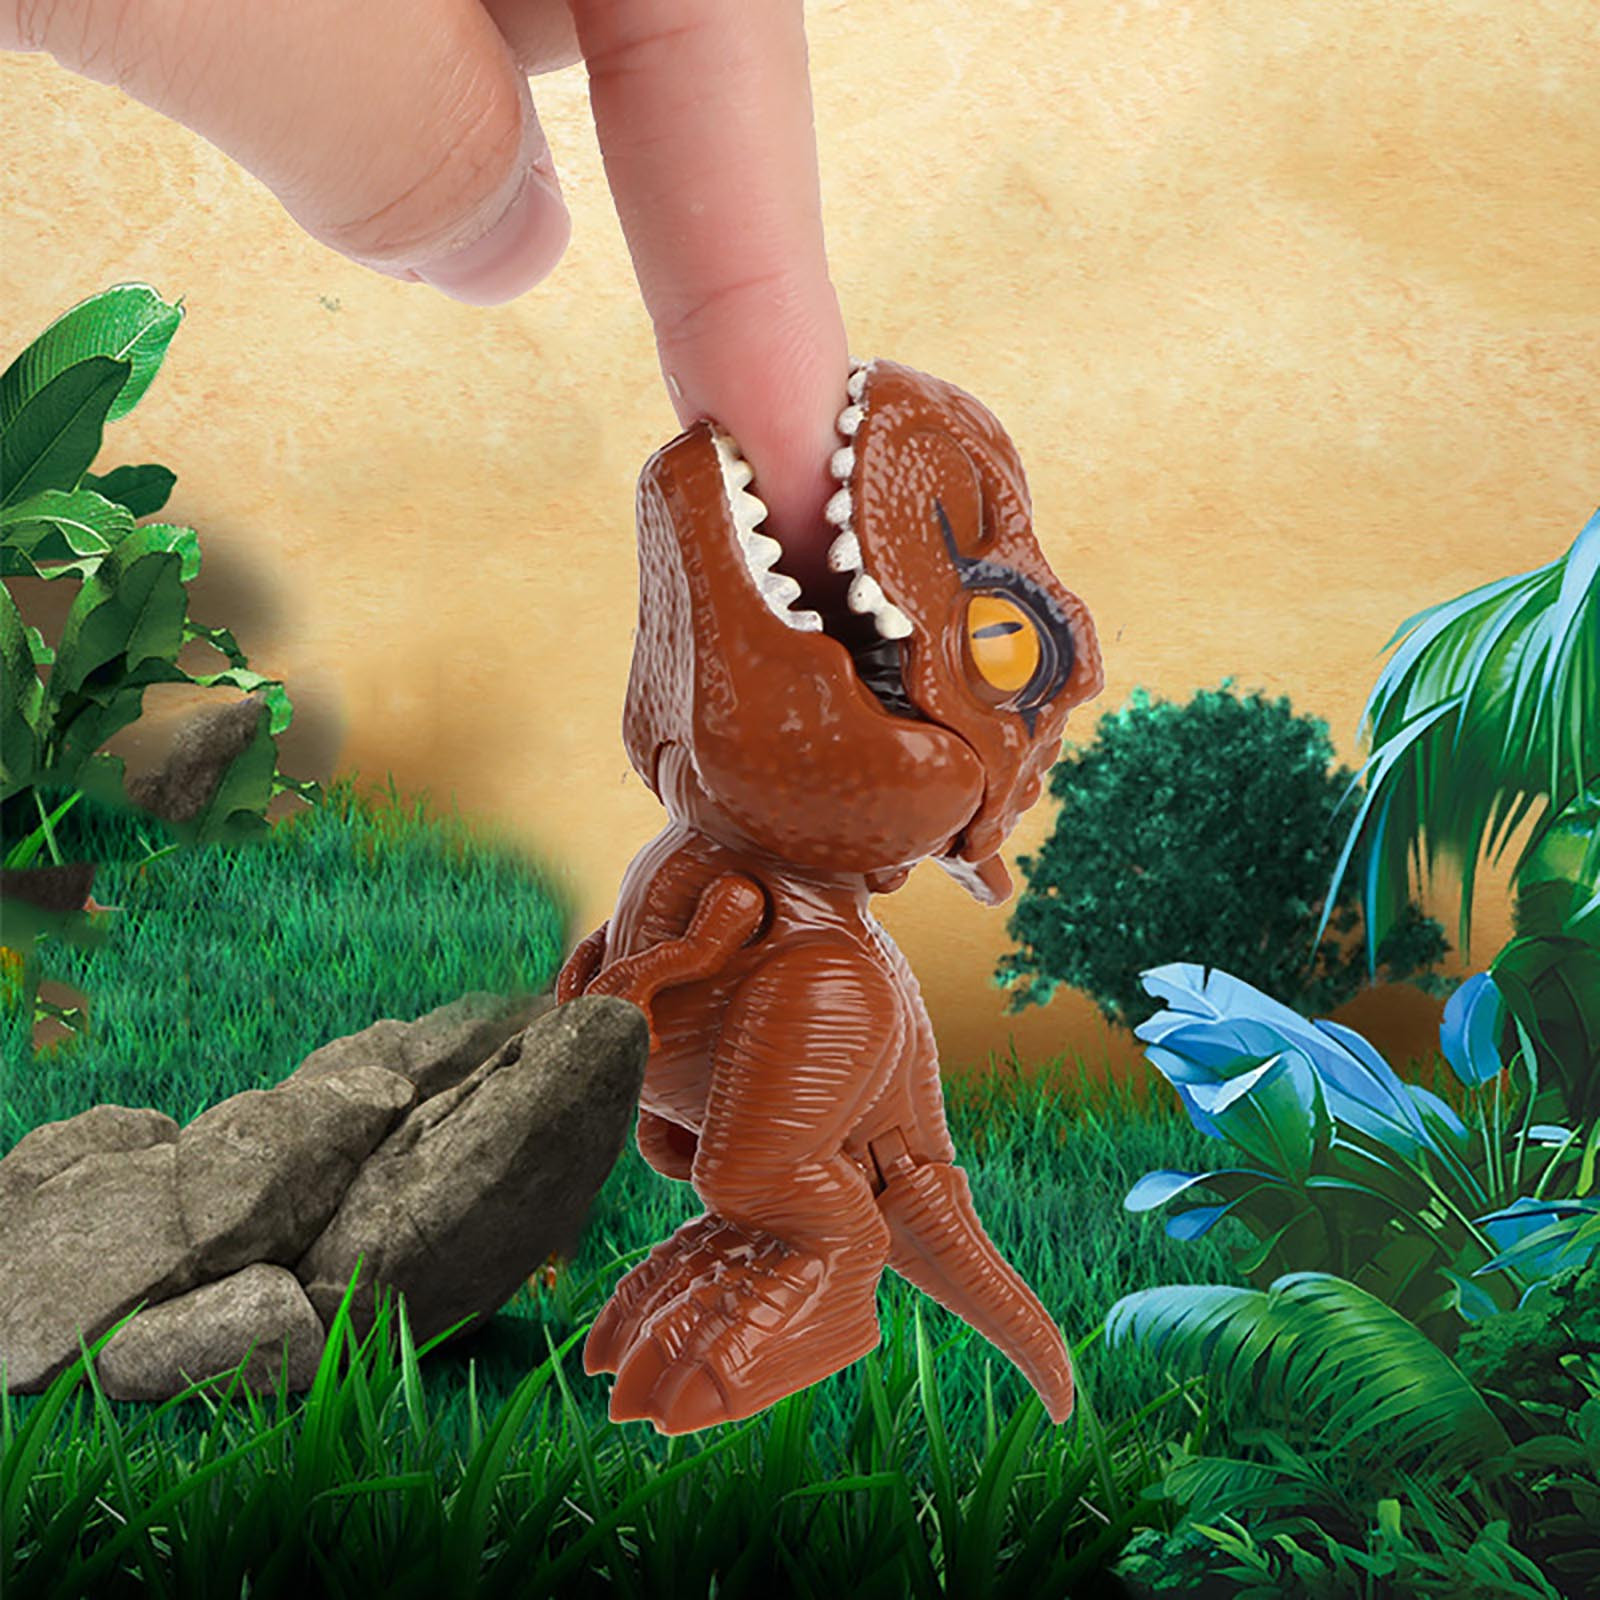 (Early Christmas Sale- 49% OFF) Finger Biting T-Rex Dinosaur Toy- Buy 5 Get 3 Free